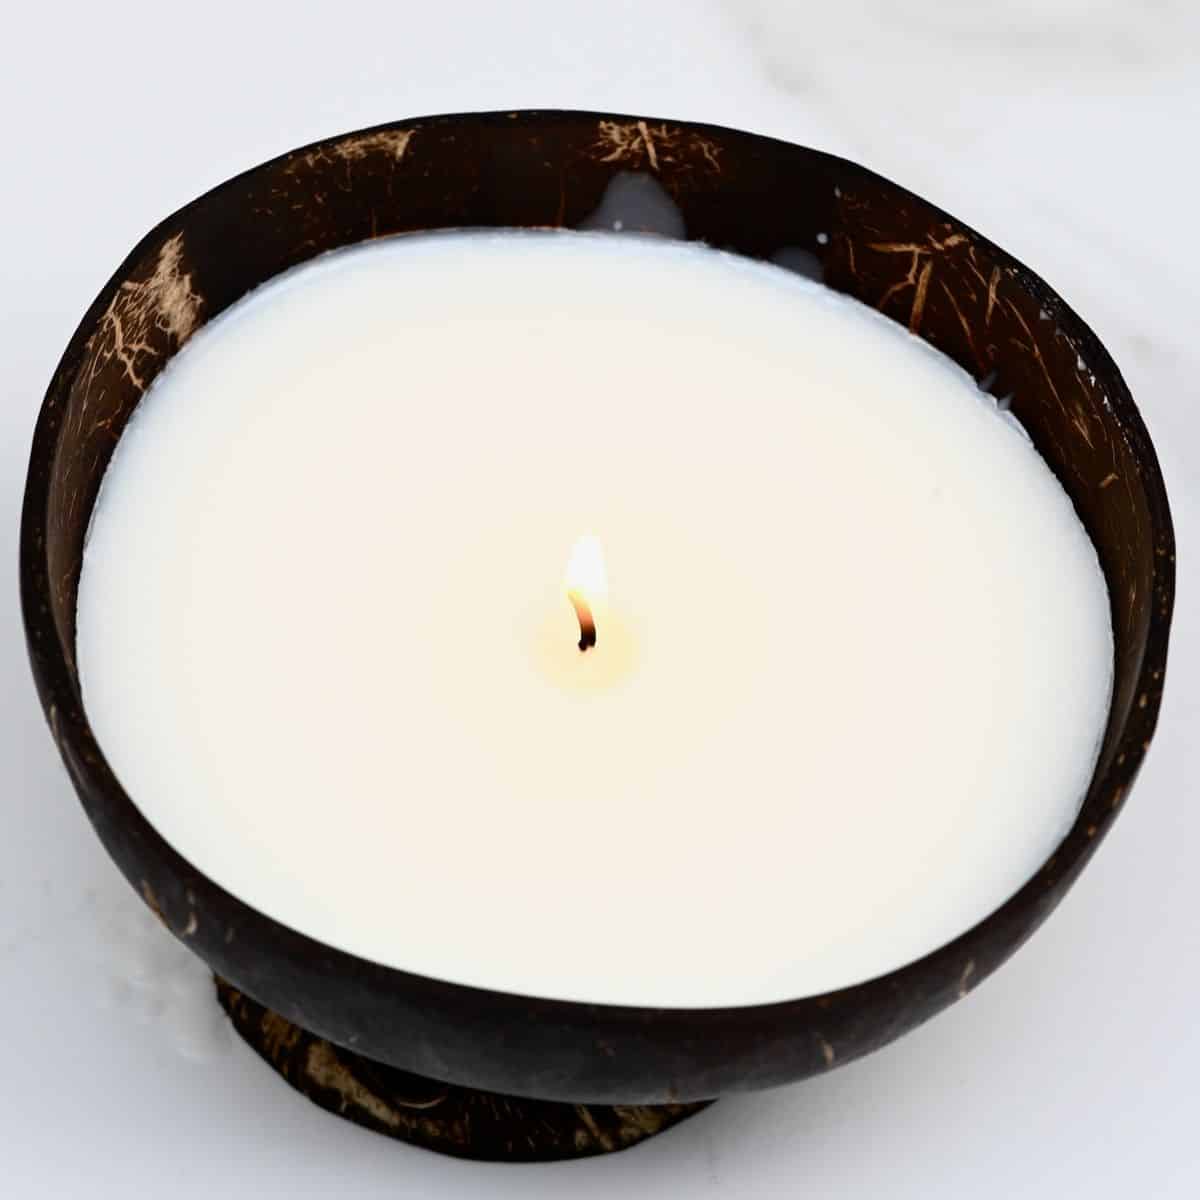 How To Calculate Your Wax Per Candle Like a Pro